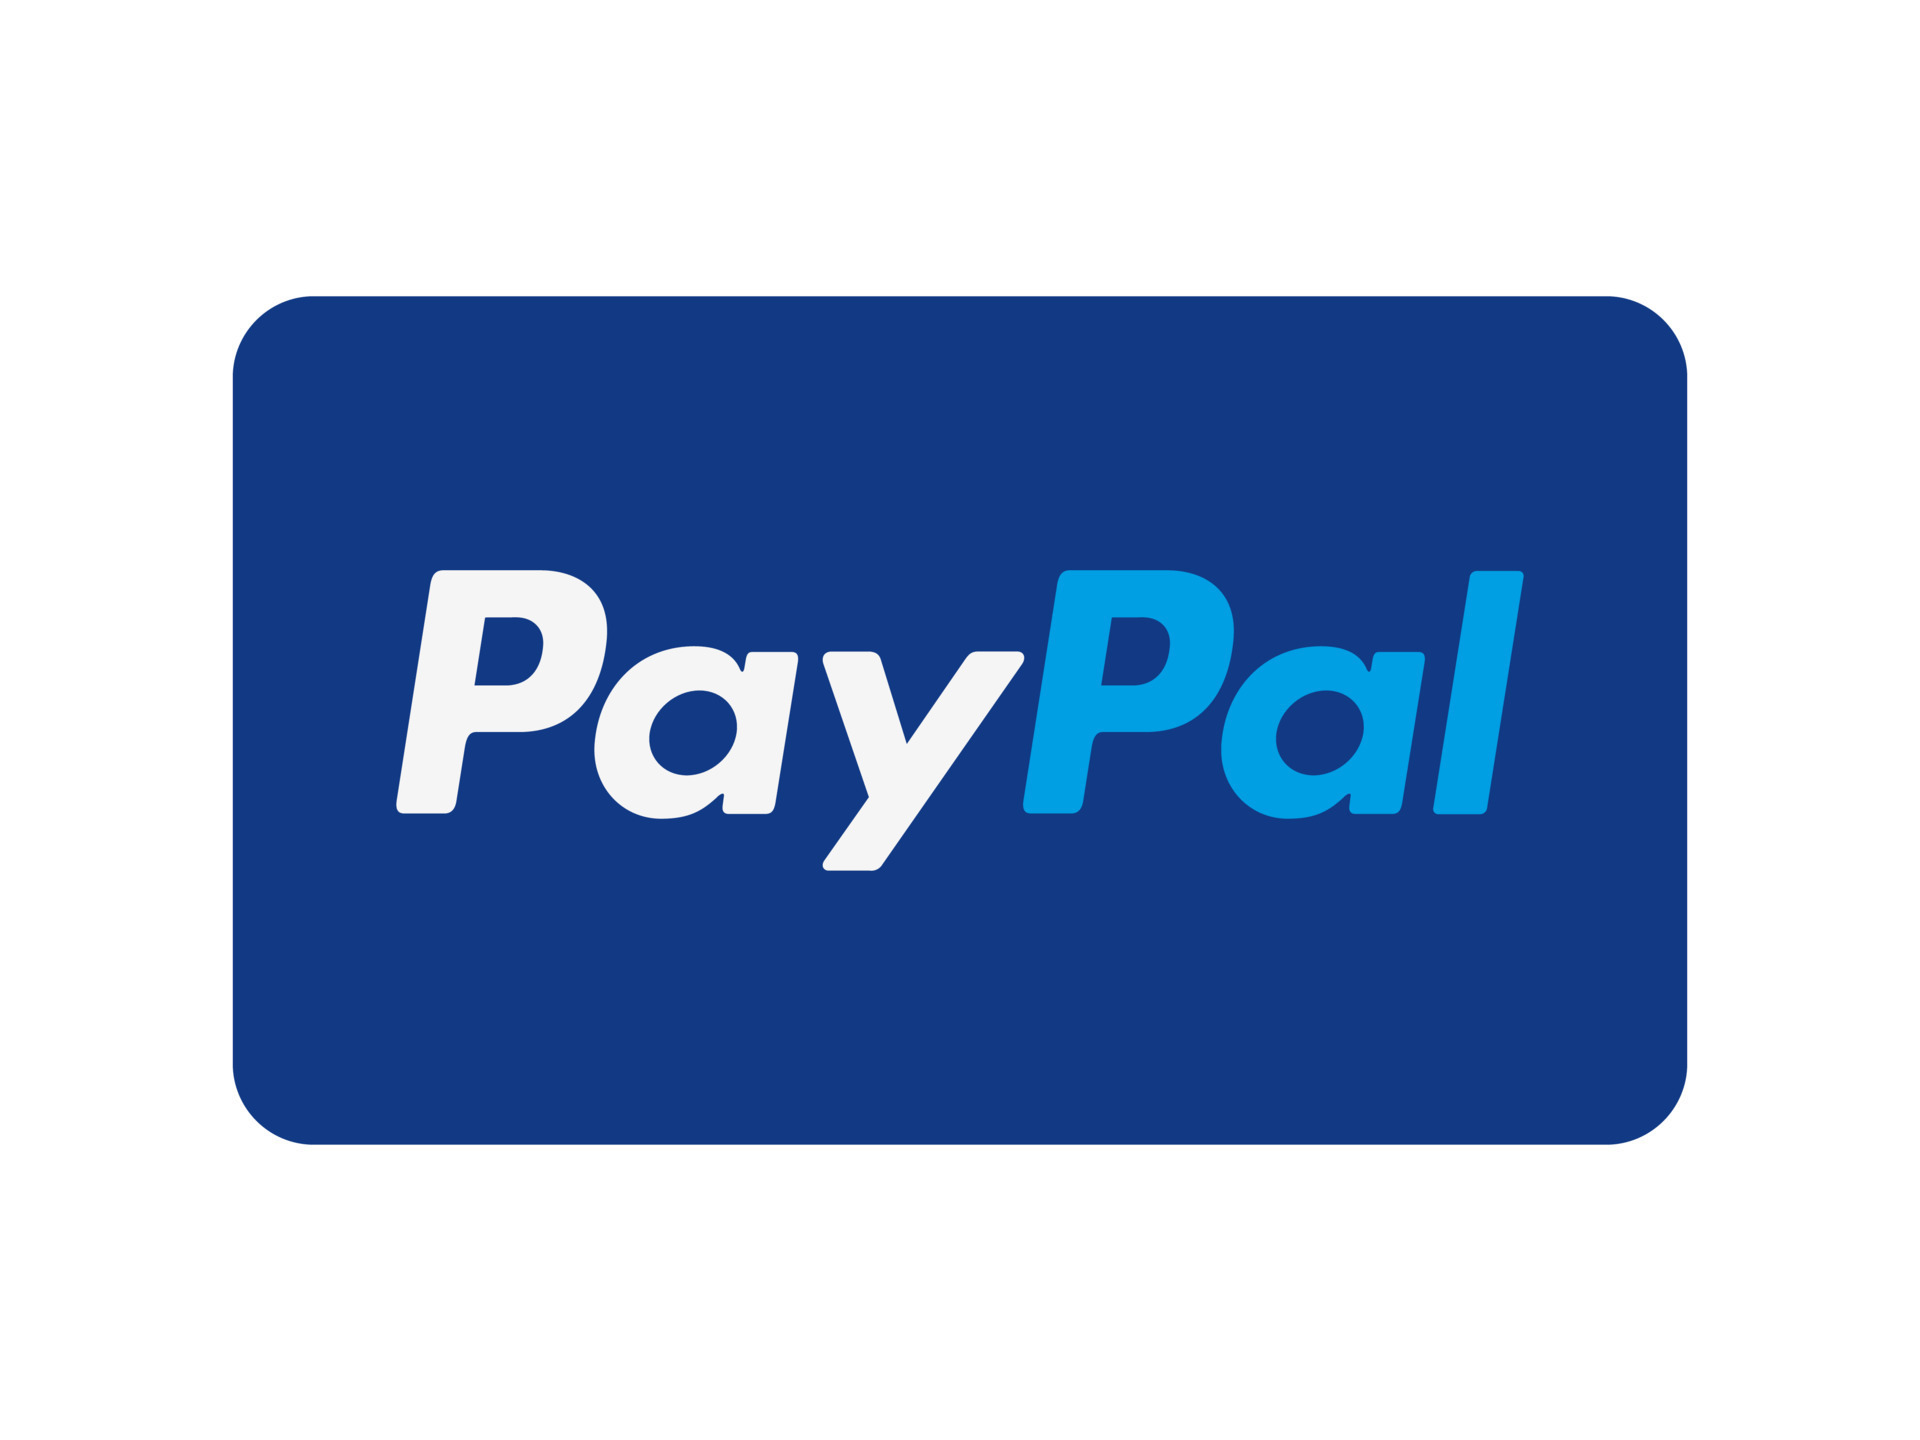 PayPal<span style='color:red;'>账号</span>被<span style='color:red;'>关联</span>！跨境<span style='color:red;'>卖家</span><span style='color:red;'>如何</span>自救？<span style='color:red;'>关于</span>PayPal<span style='color:red;'>防</span><span style='color:red;'>关联</span>你不得不知道的事！